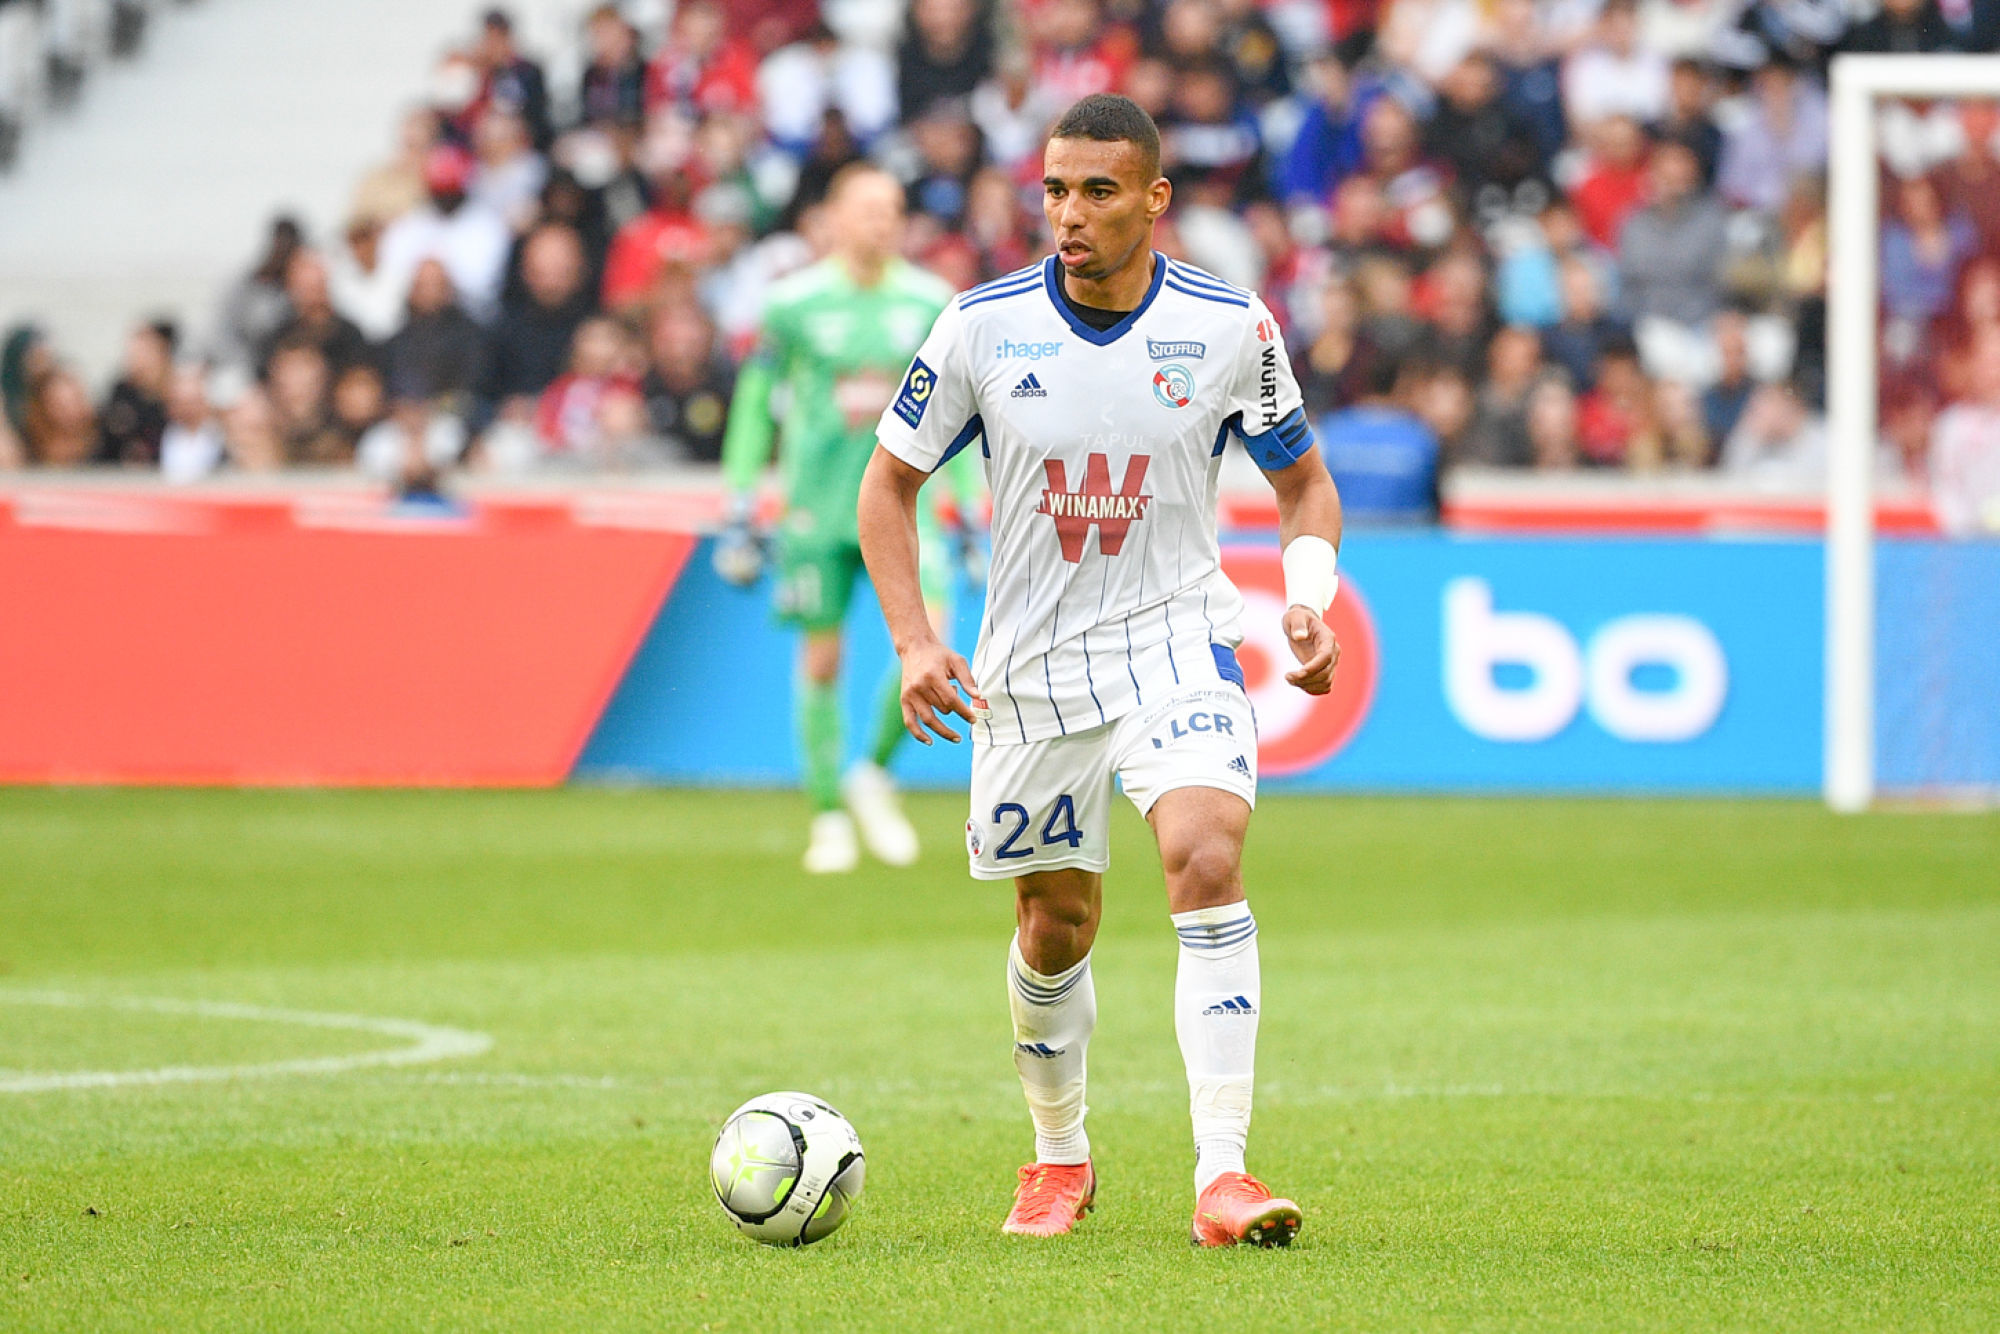 Ligue 1: Strasbourg – Auxerre, the probable line-ups